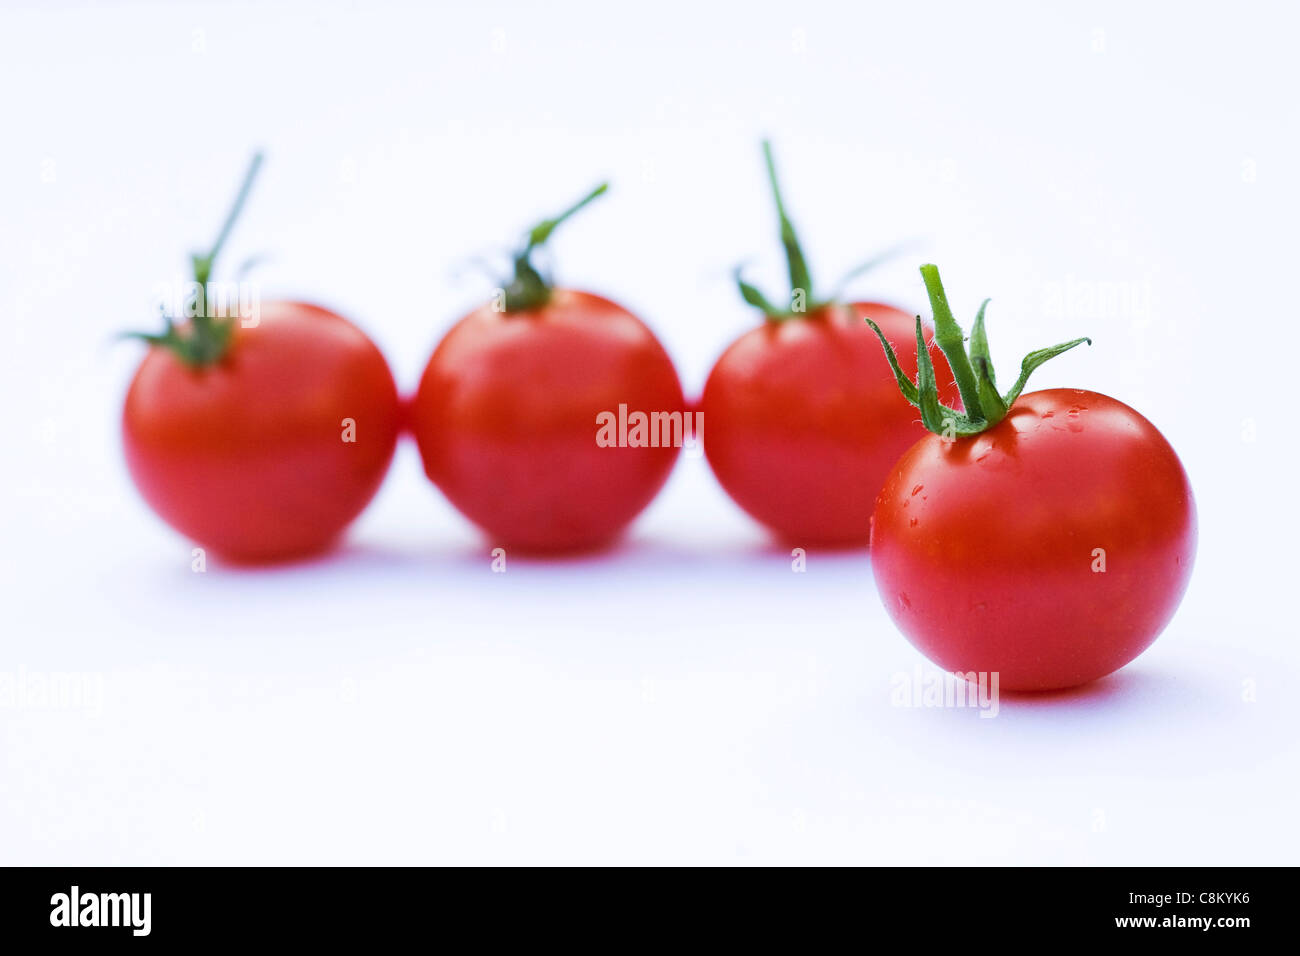 Lycopersicon esculentum. Small cherry tomatoes 'Gardeners Delight' on a white background. Stock Photo